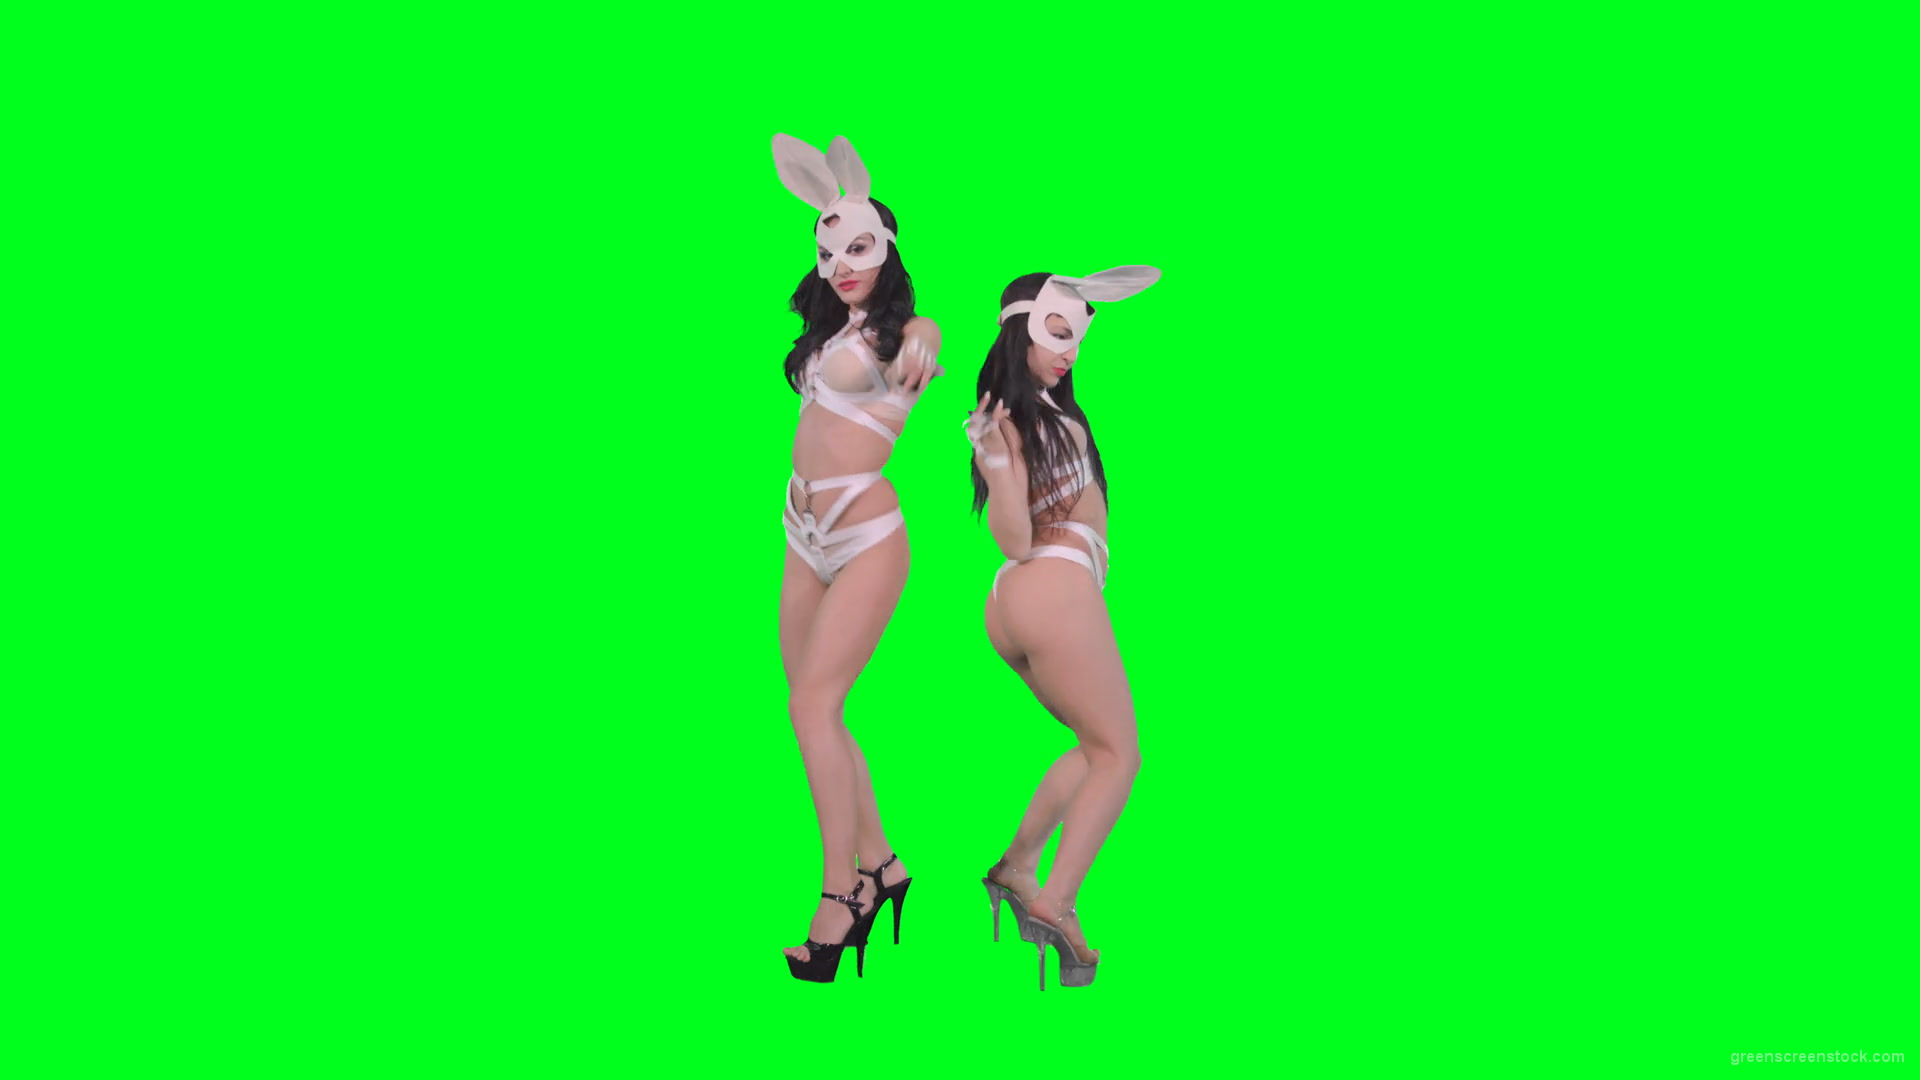 Go-Go-Dancing-female-team-duet-making-erotic-moves-on-green-screen-4K-Video-Footage-1920_005 Green Screen Stock